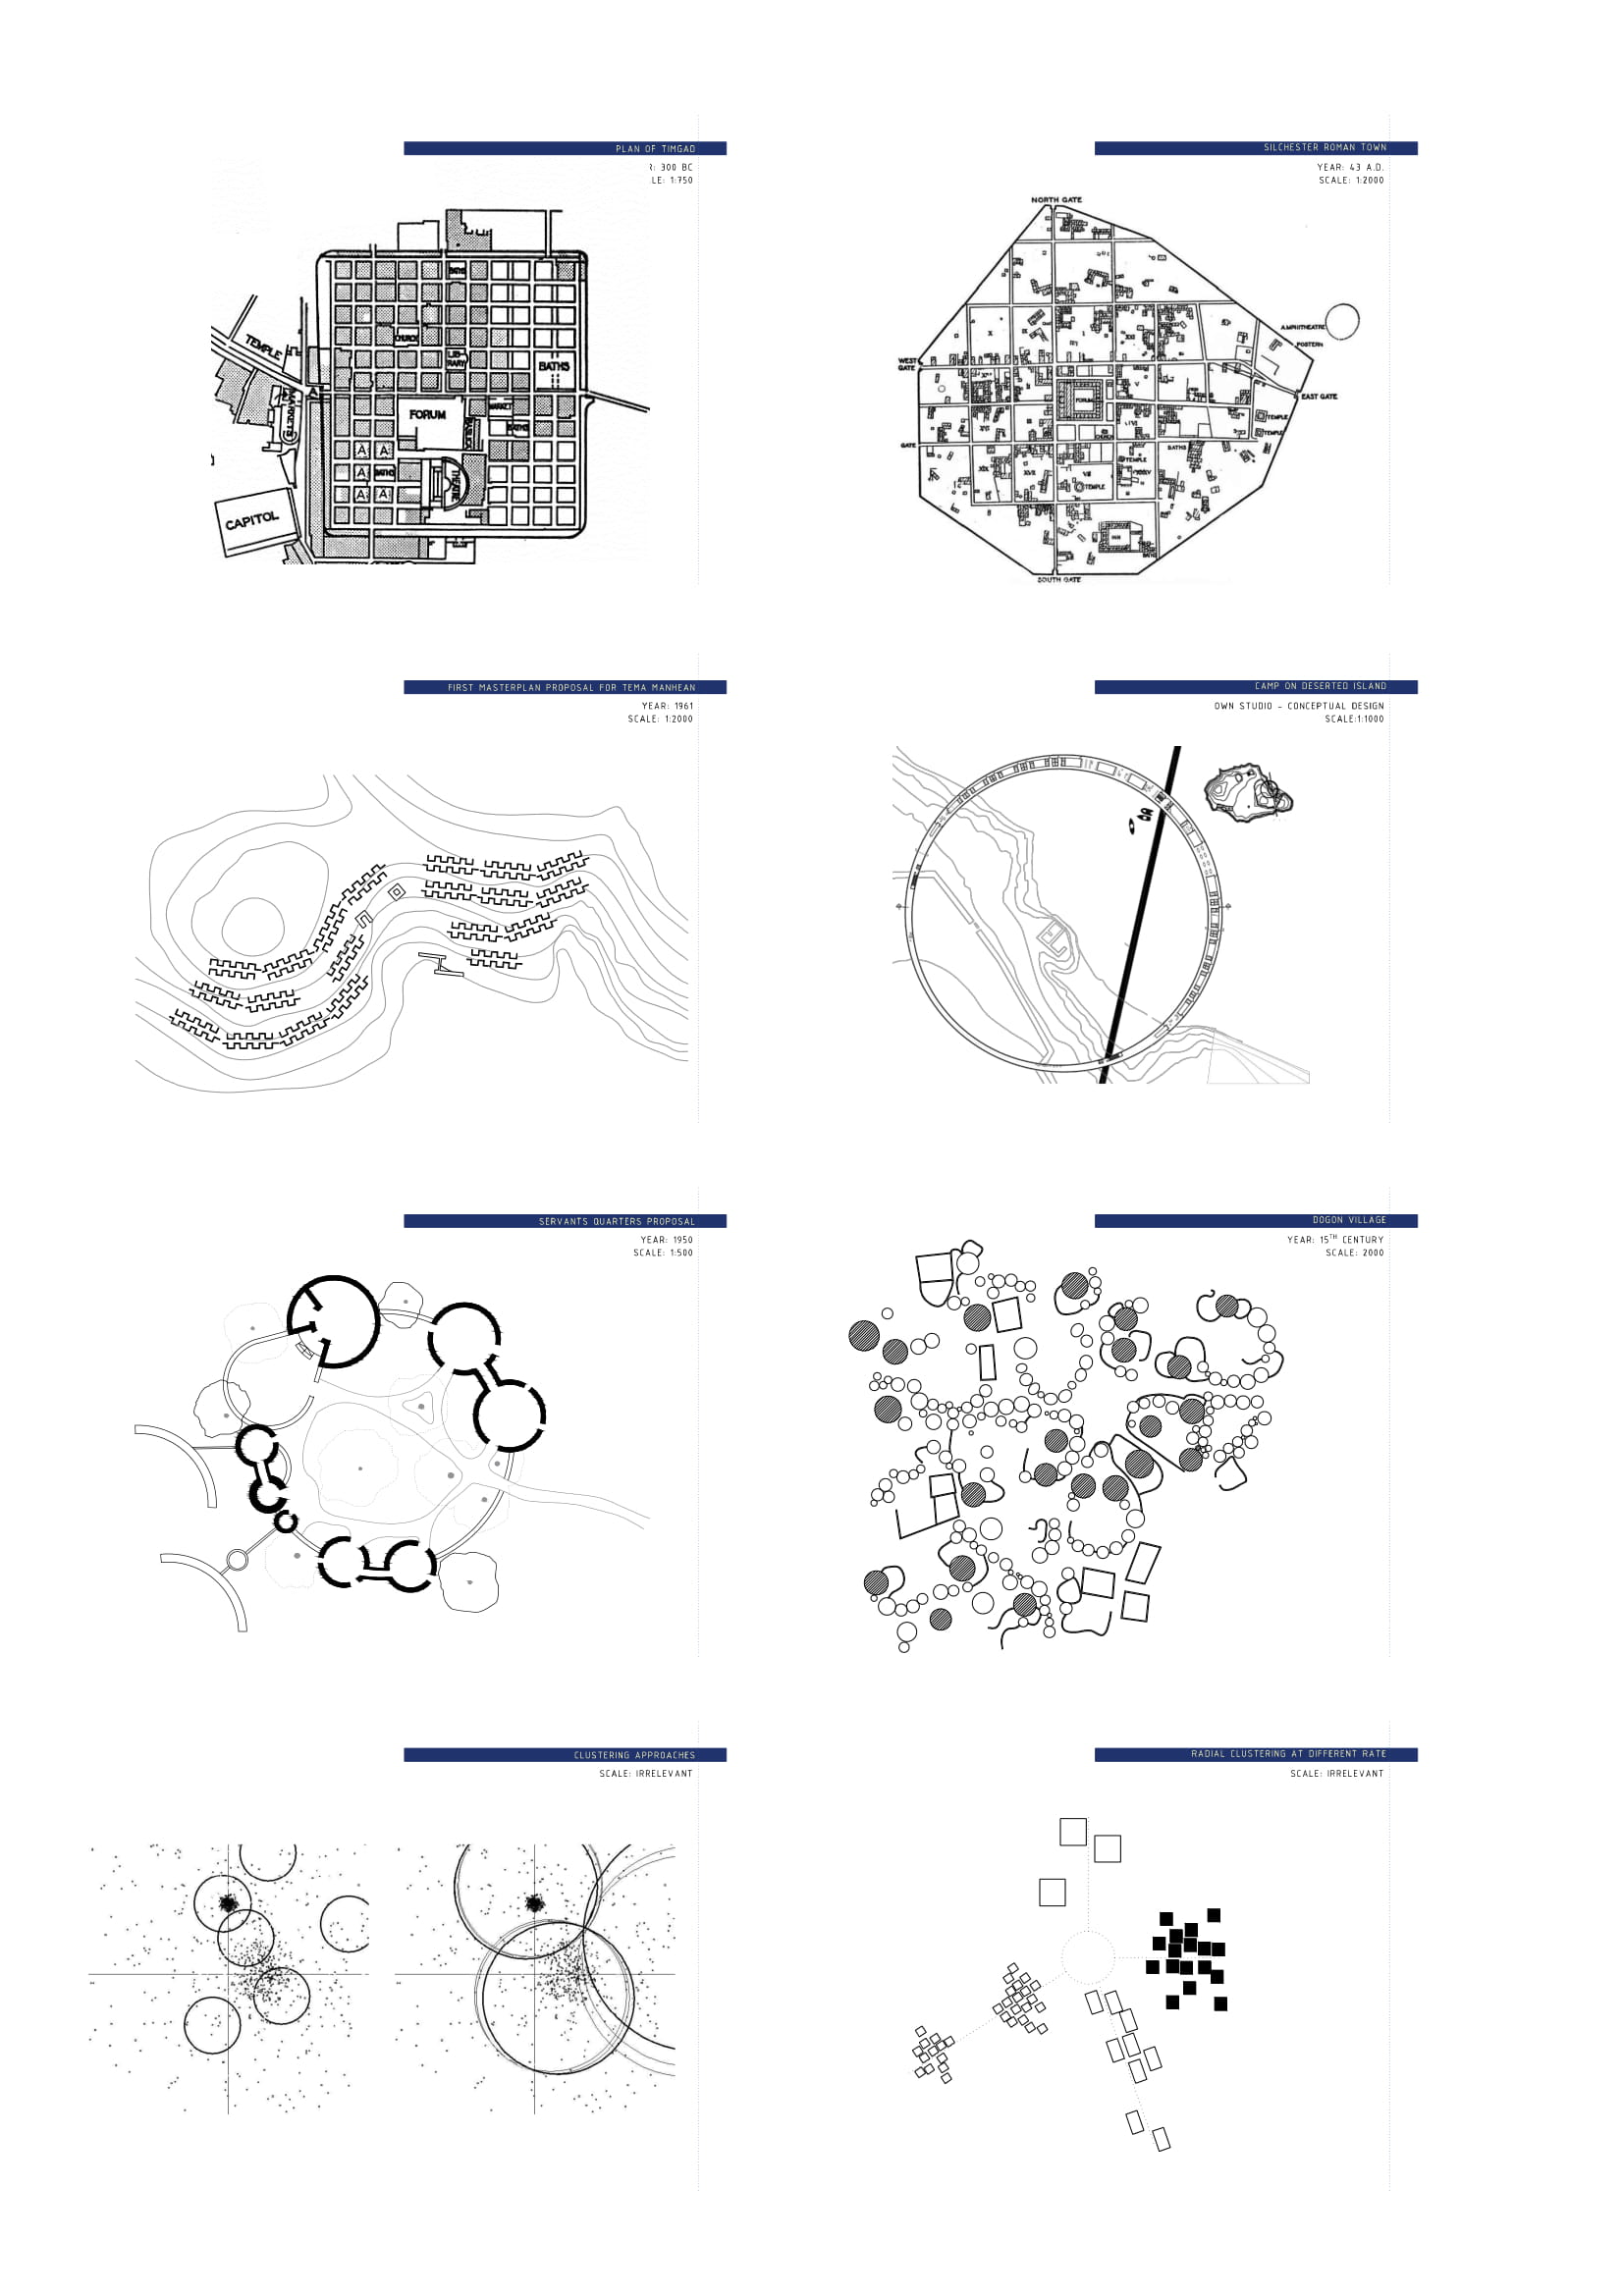 Clustering Architecture Studio 9 Architectural Notations